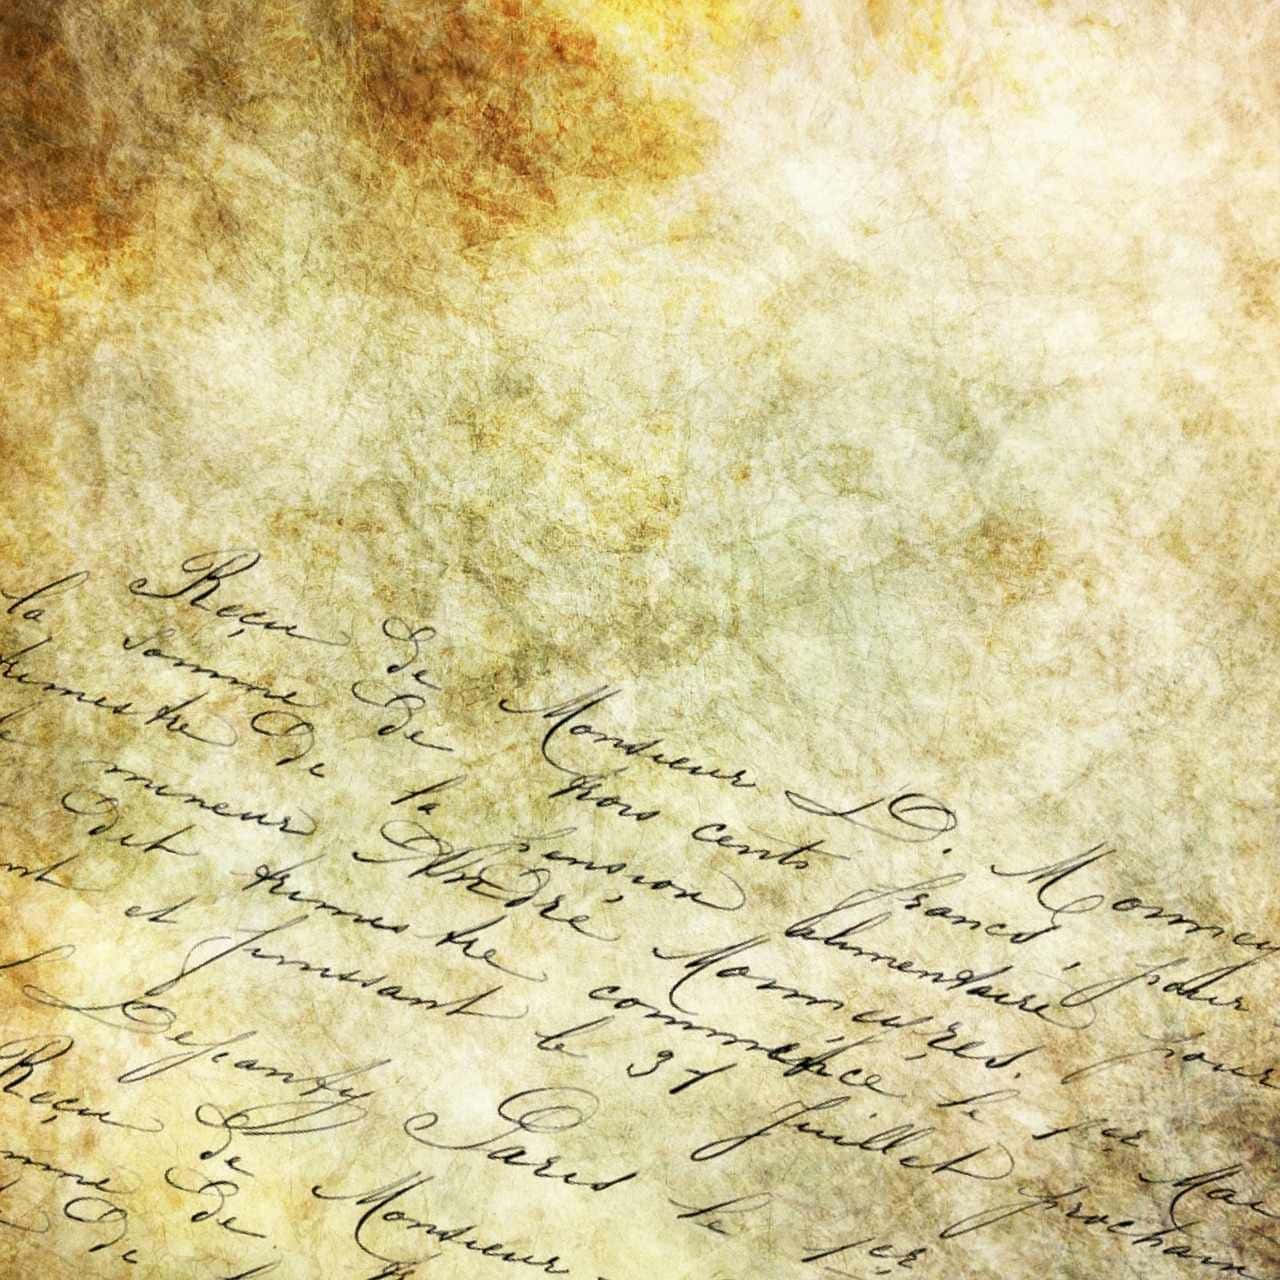 An Old Handwritten Letter On A Grungy Background